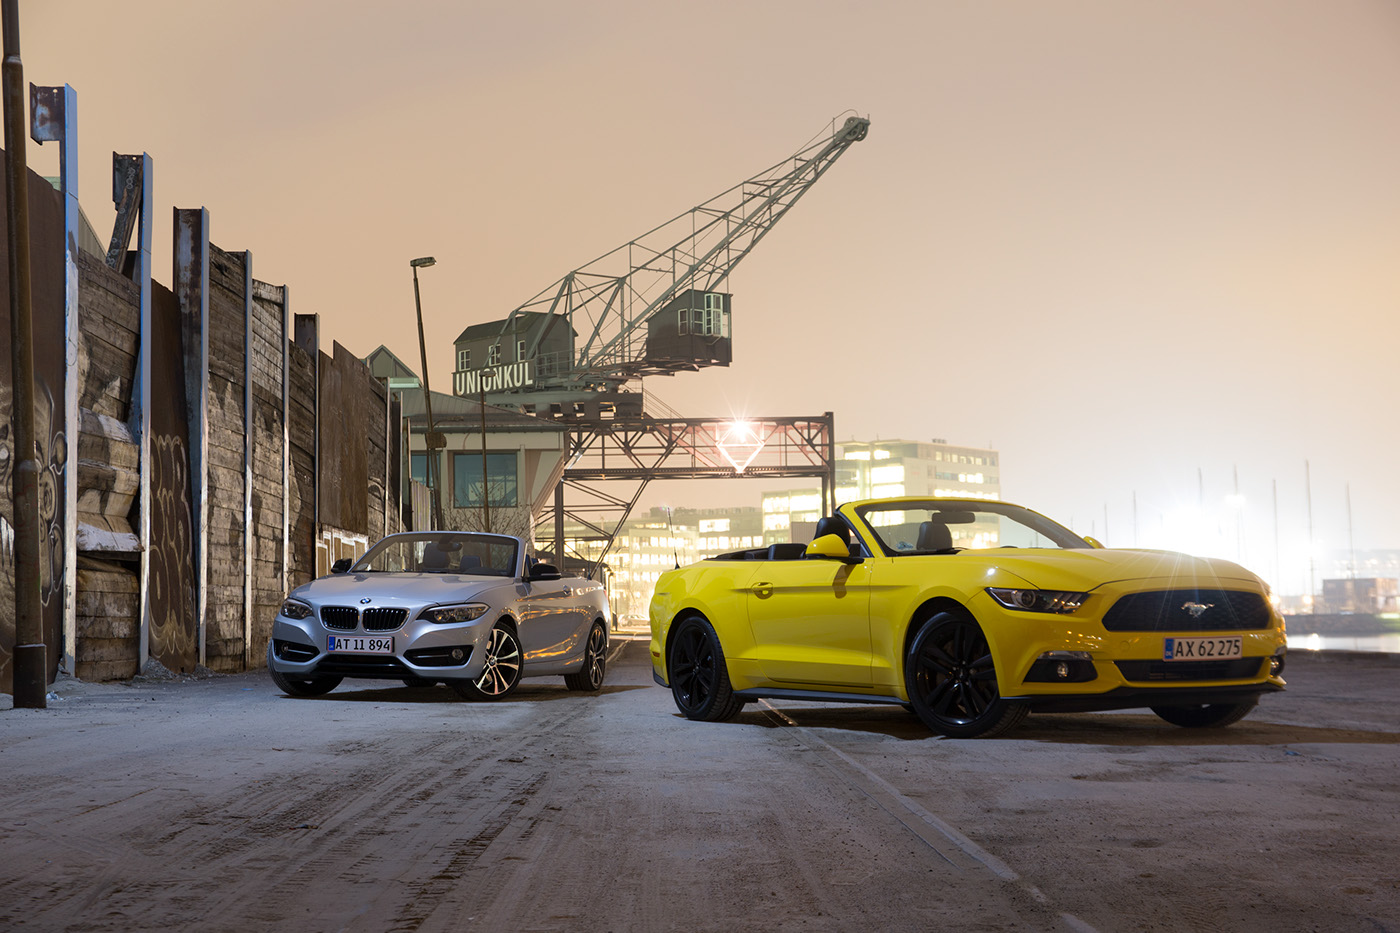 Cars mikael wilken wilken retouch mercedes AMG Mercedes AMG car magazine Ford Ford Mustang BMW opel VW Professionel image editing color grading retouch